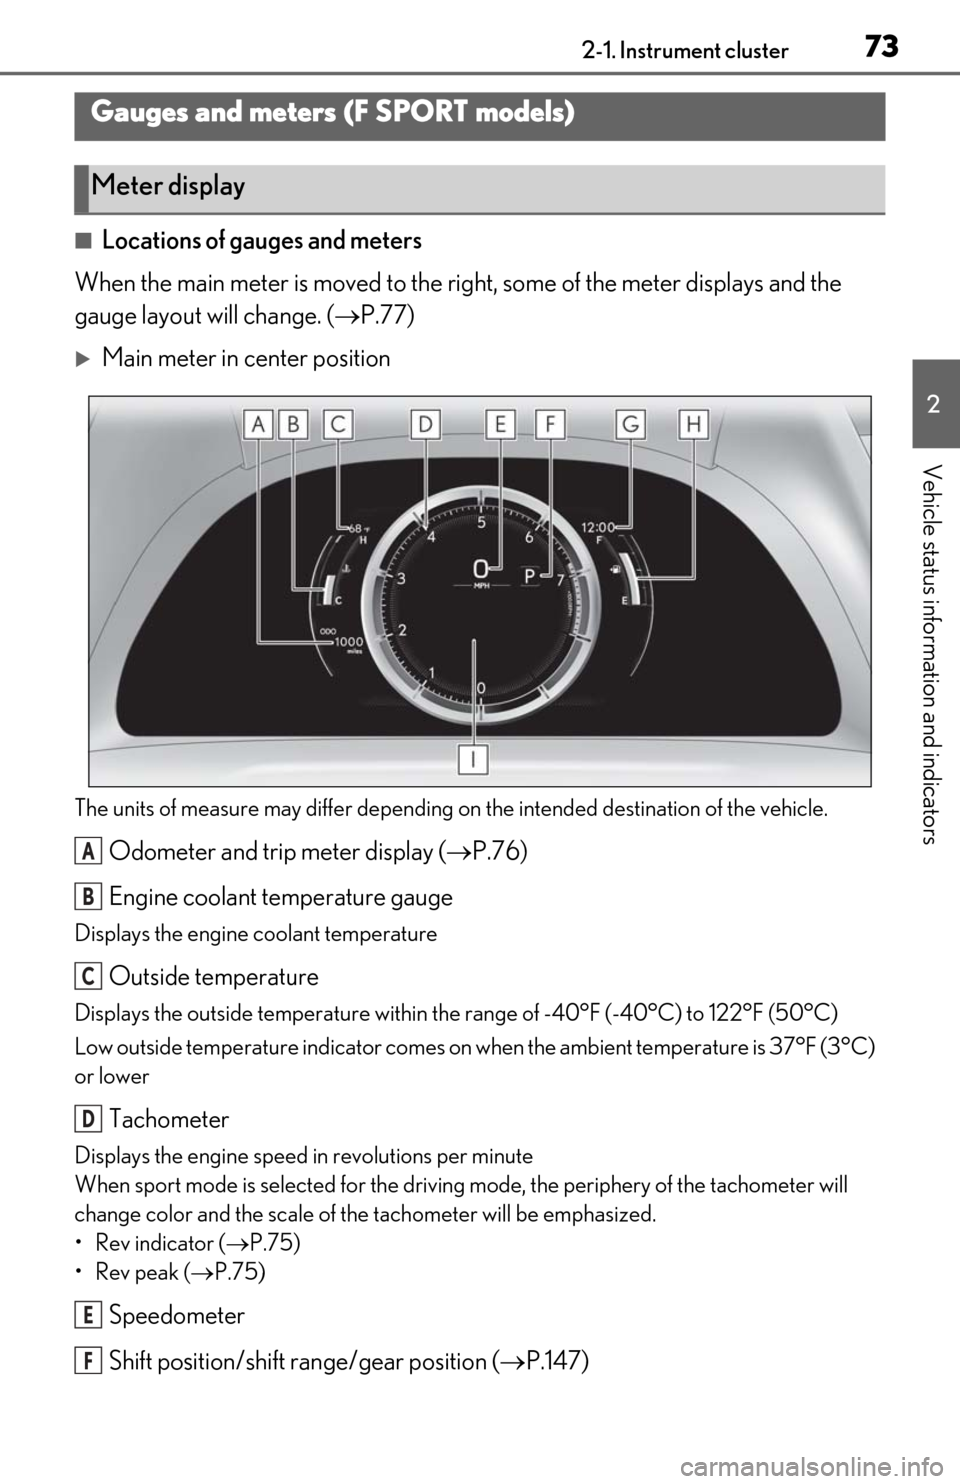 Lexus ES350 2020  Owners Manuals / LEXUS 2020 ES350 THROUGH SEPT. 2019 PROD. OWNERS MANUAL (OM06174U) 732-1. Instrument cluster
2
Vehicle status information and indicators
■Locations of gauges and meters
When the main meter is moved to the righ t, some of the meter displays and the 
gauge layout wil